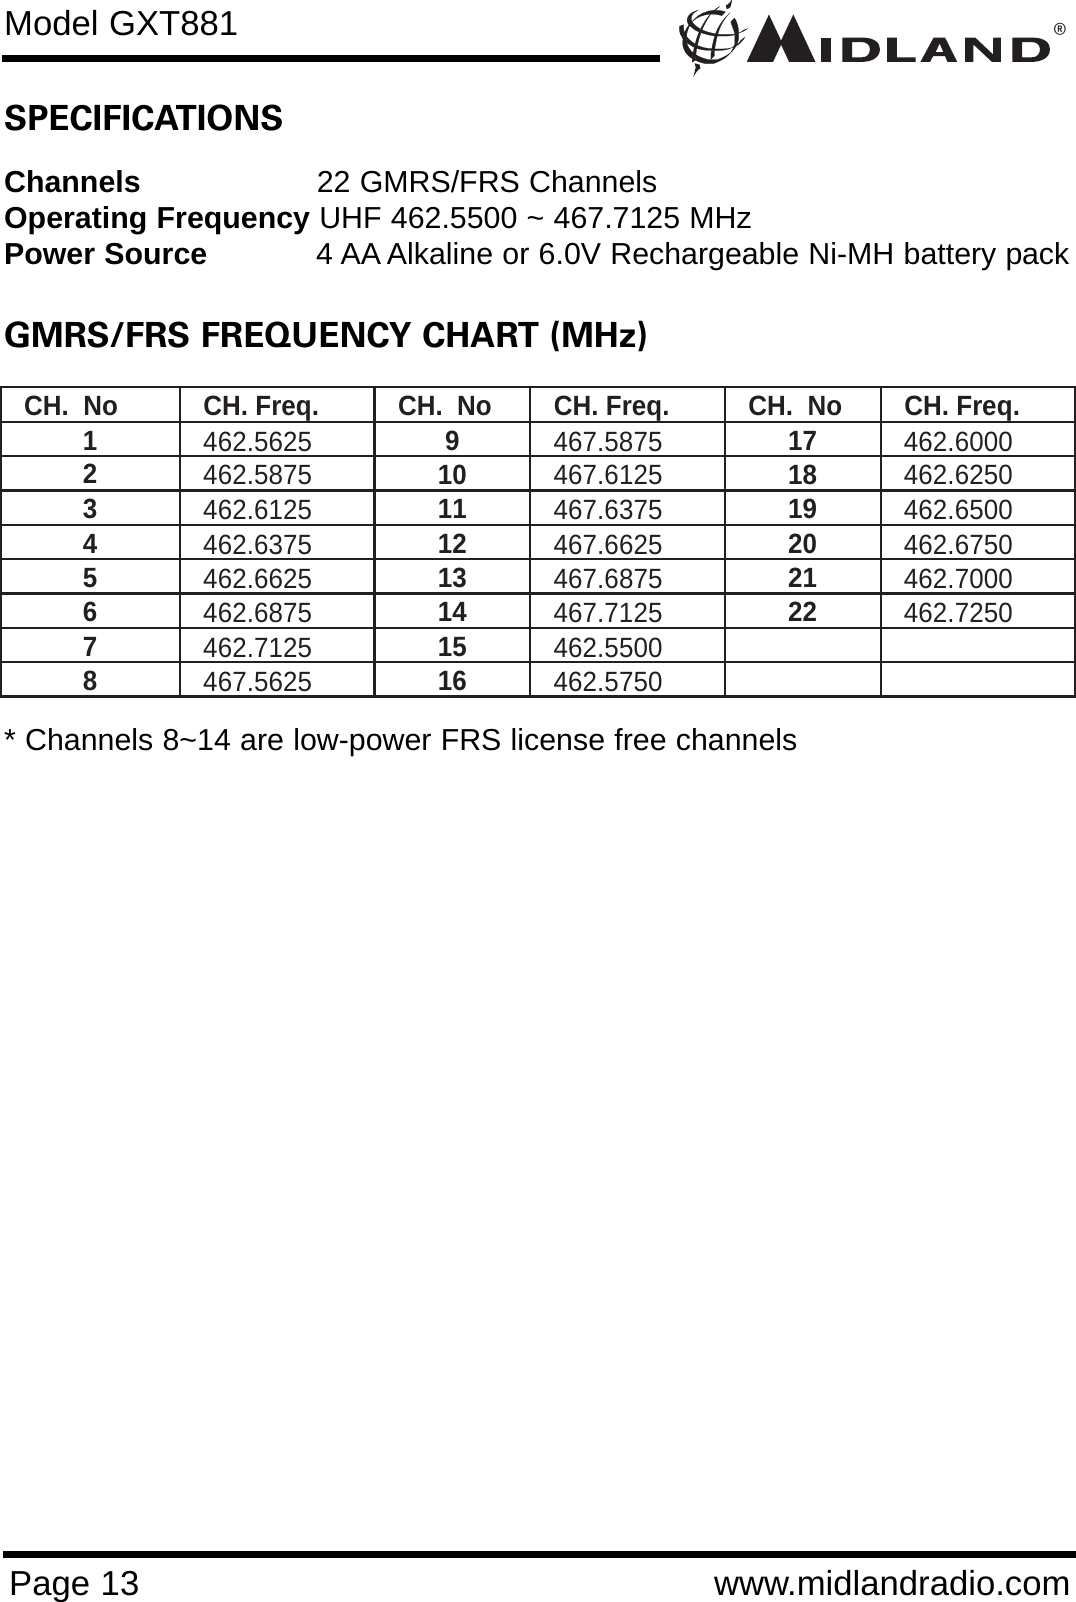 ®Page 13 www.midlandradio.comSPECIFICATIONSChannels 22 GMRS/FRS Channels Operating Frequency UHF 462.5500 ~ 467.7125 MHzPower Source 4 AA Alkaline or 6.0V Rechargeable Ni-MH battery packGMRS/FRS FREQUENCY CHART (MHz)CH.  No  CH. Freq.  CH.  No  CH. Freq.  CH.  No  CH. Freq. 1  462.5625 9  467.5875 17  462.6000 2  462.5875 10  467.6125 18  462.6250 3  462.6125 11  467.6375 19  462.6500 4  462.6375 12  467.6625 20  462.6750 5  462.6625 13  467.6875 21  462.7000 6  462.6875 14  467.7125 22  462.7250 7  462.7125 15  462.5500   8  467.5625 16  462.5750   * Channels 8~14 are low-power FRS license free channelsModel GXT881